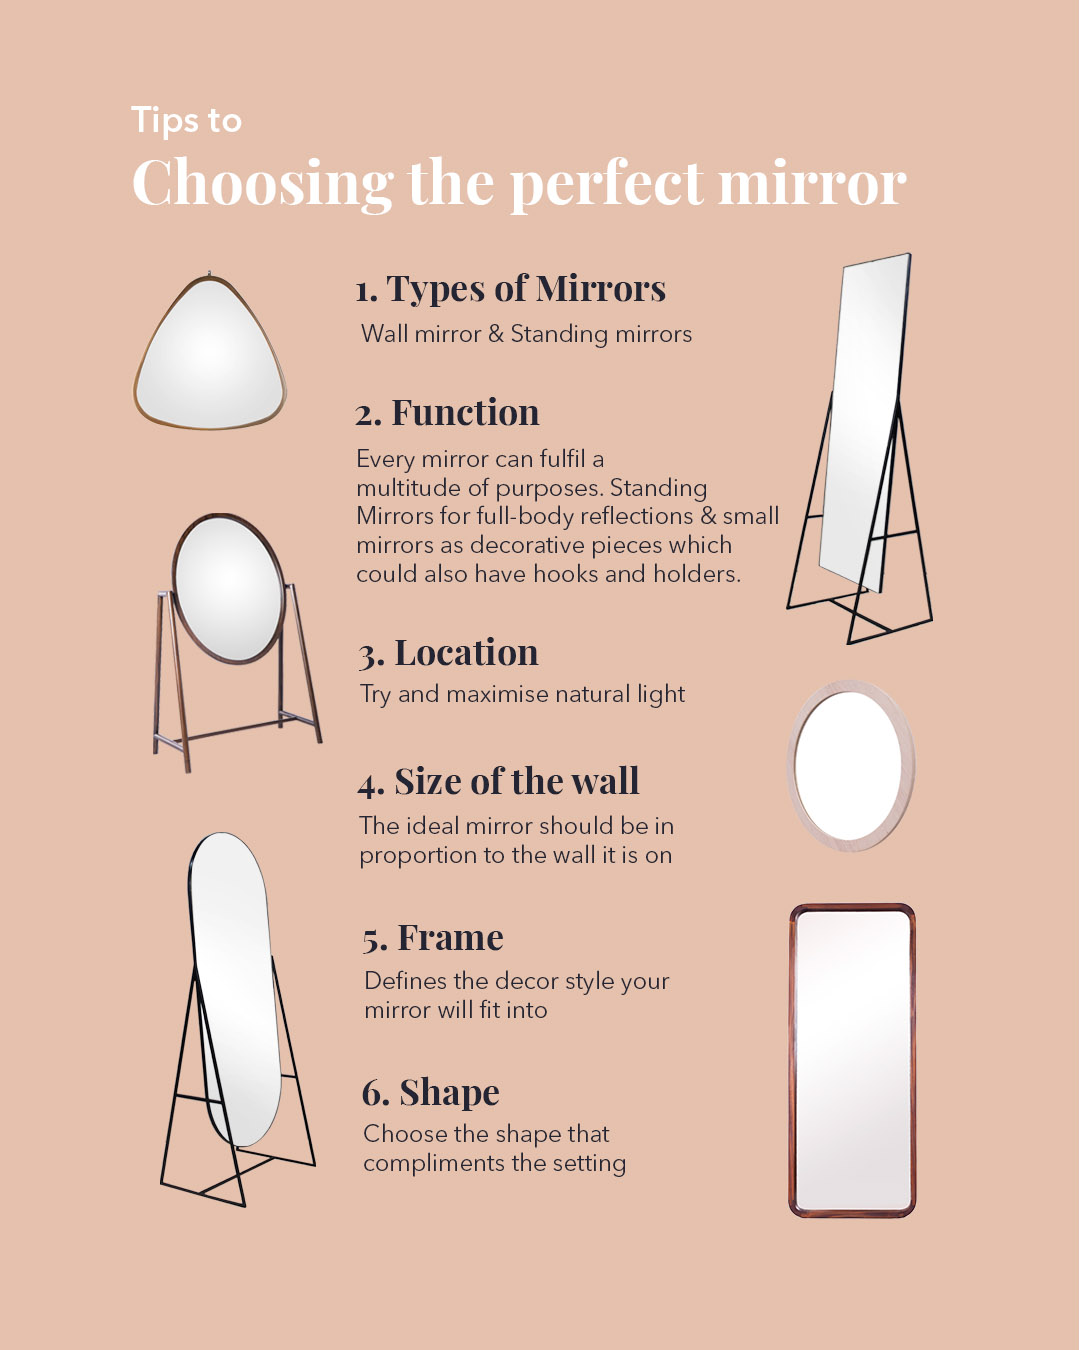 7 Different Types of Mirrors for Your Home